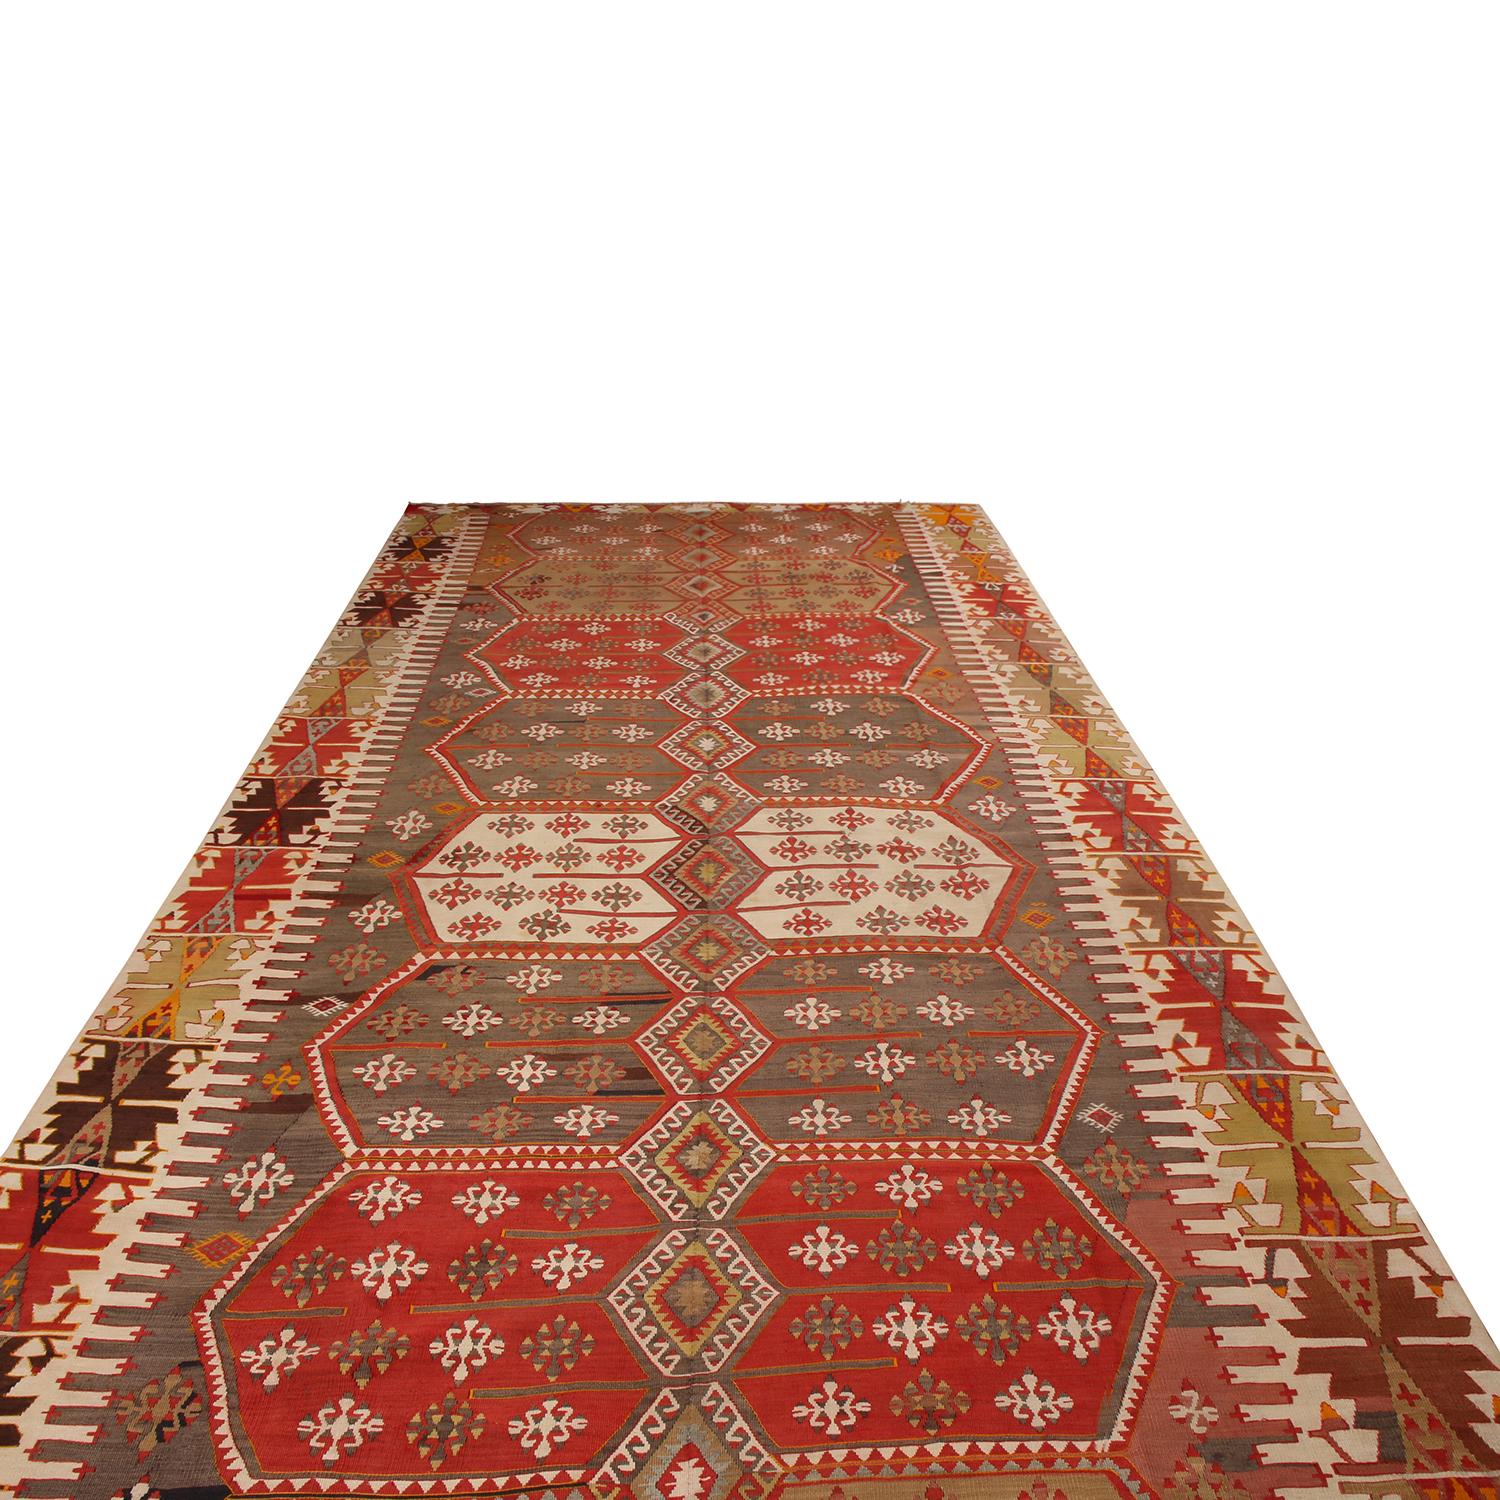 Flat-woven in high-quality wool originating from Turkey between 1930-1940, this vintage Konya Kilim rug enjoys a distinguished grandeur in its field design only select pieces of its era and family enjoy, marrying traditional Turkish symmetry with a